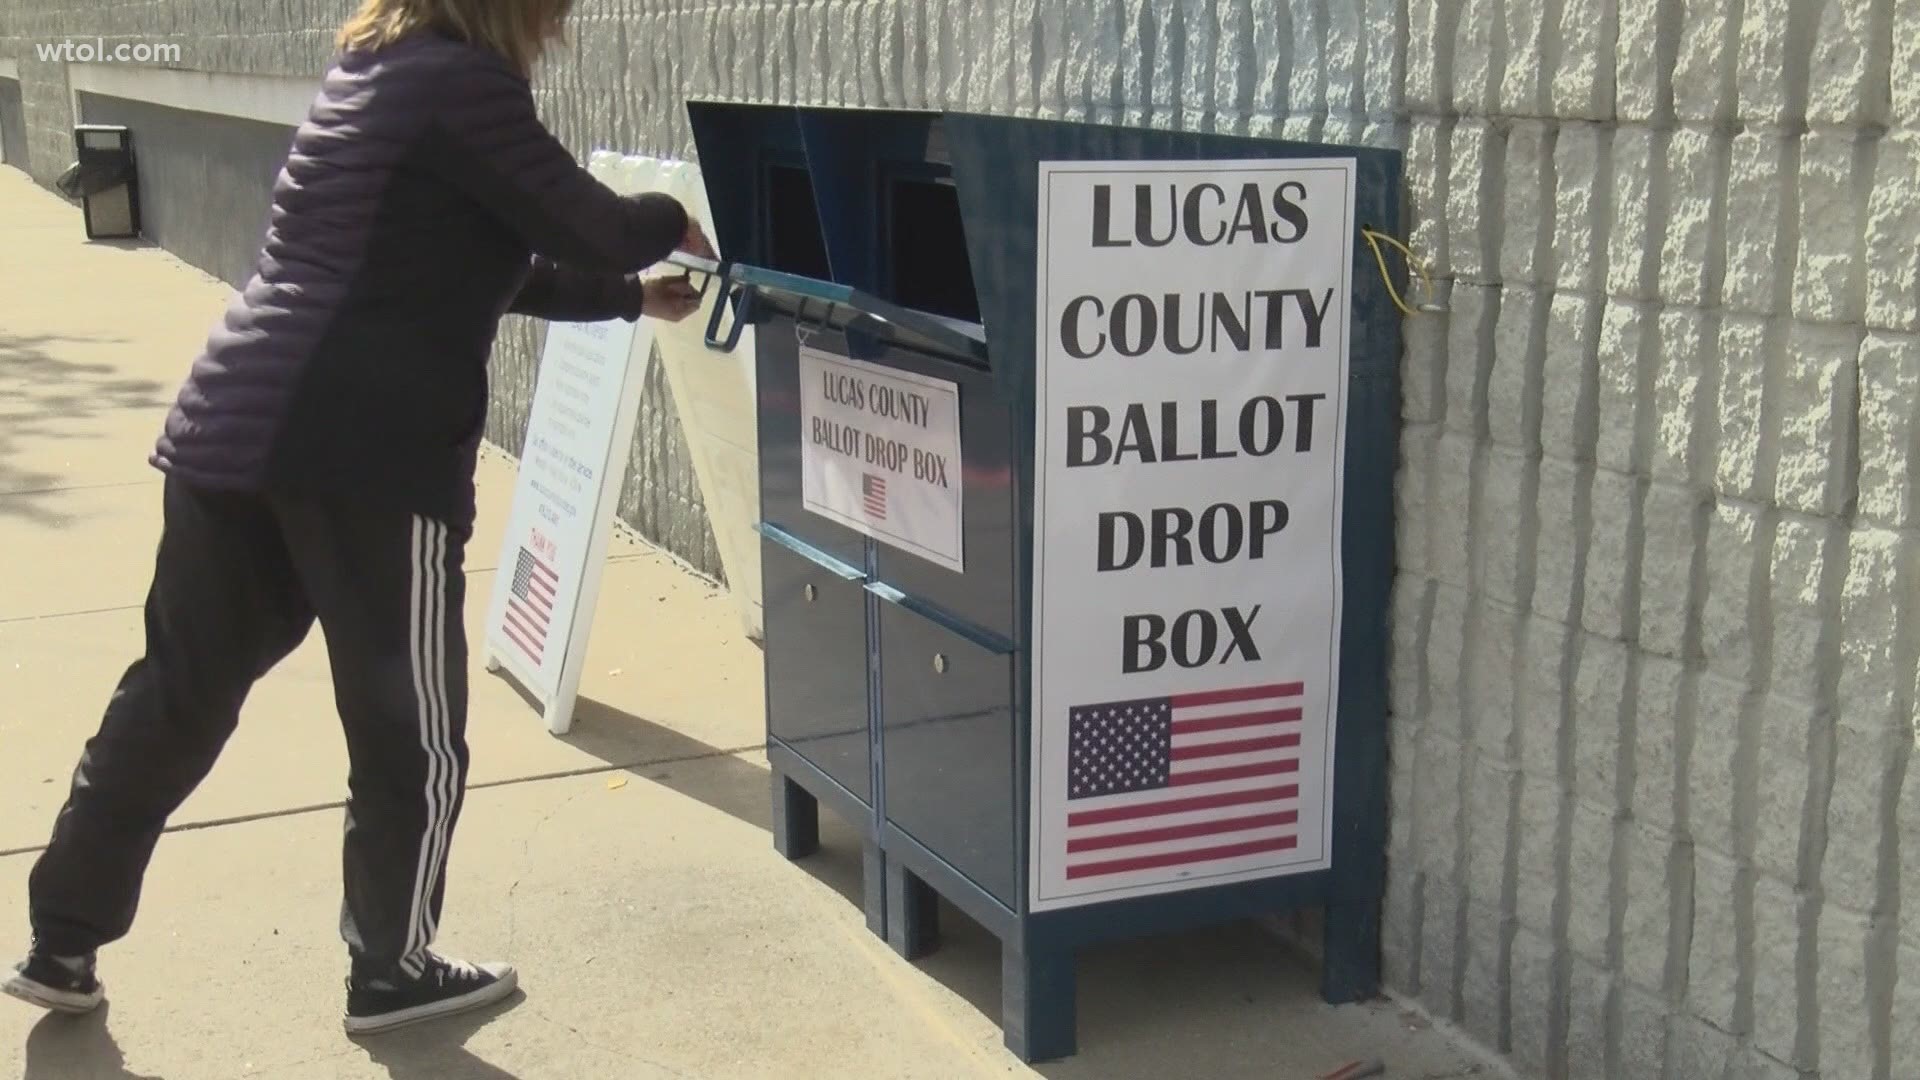 Secretary of State Frank LaRose addressed some of the proposed changes, including automated voter registration at BMVs and 3 drop boxes outside boards of elections.